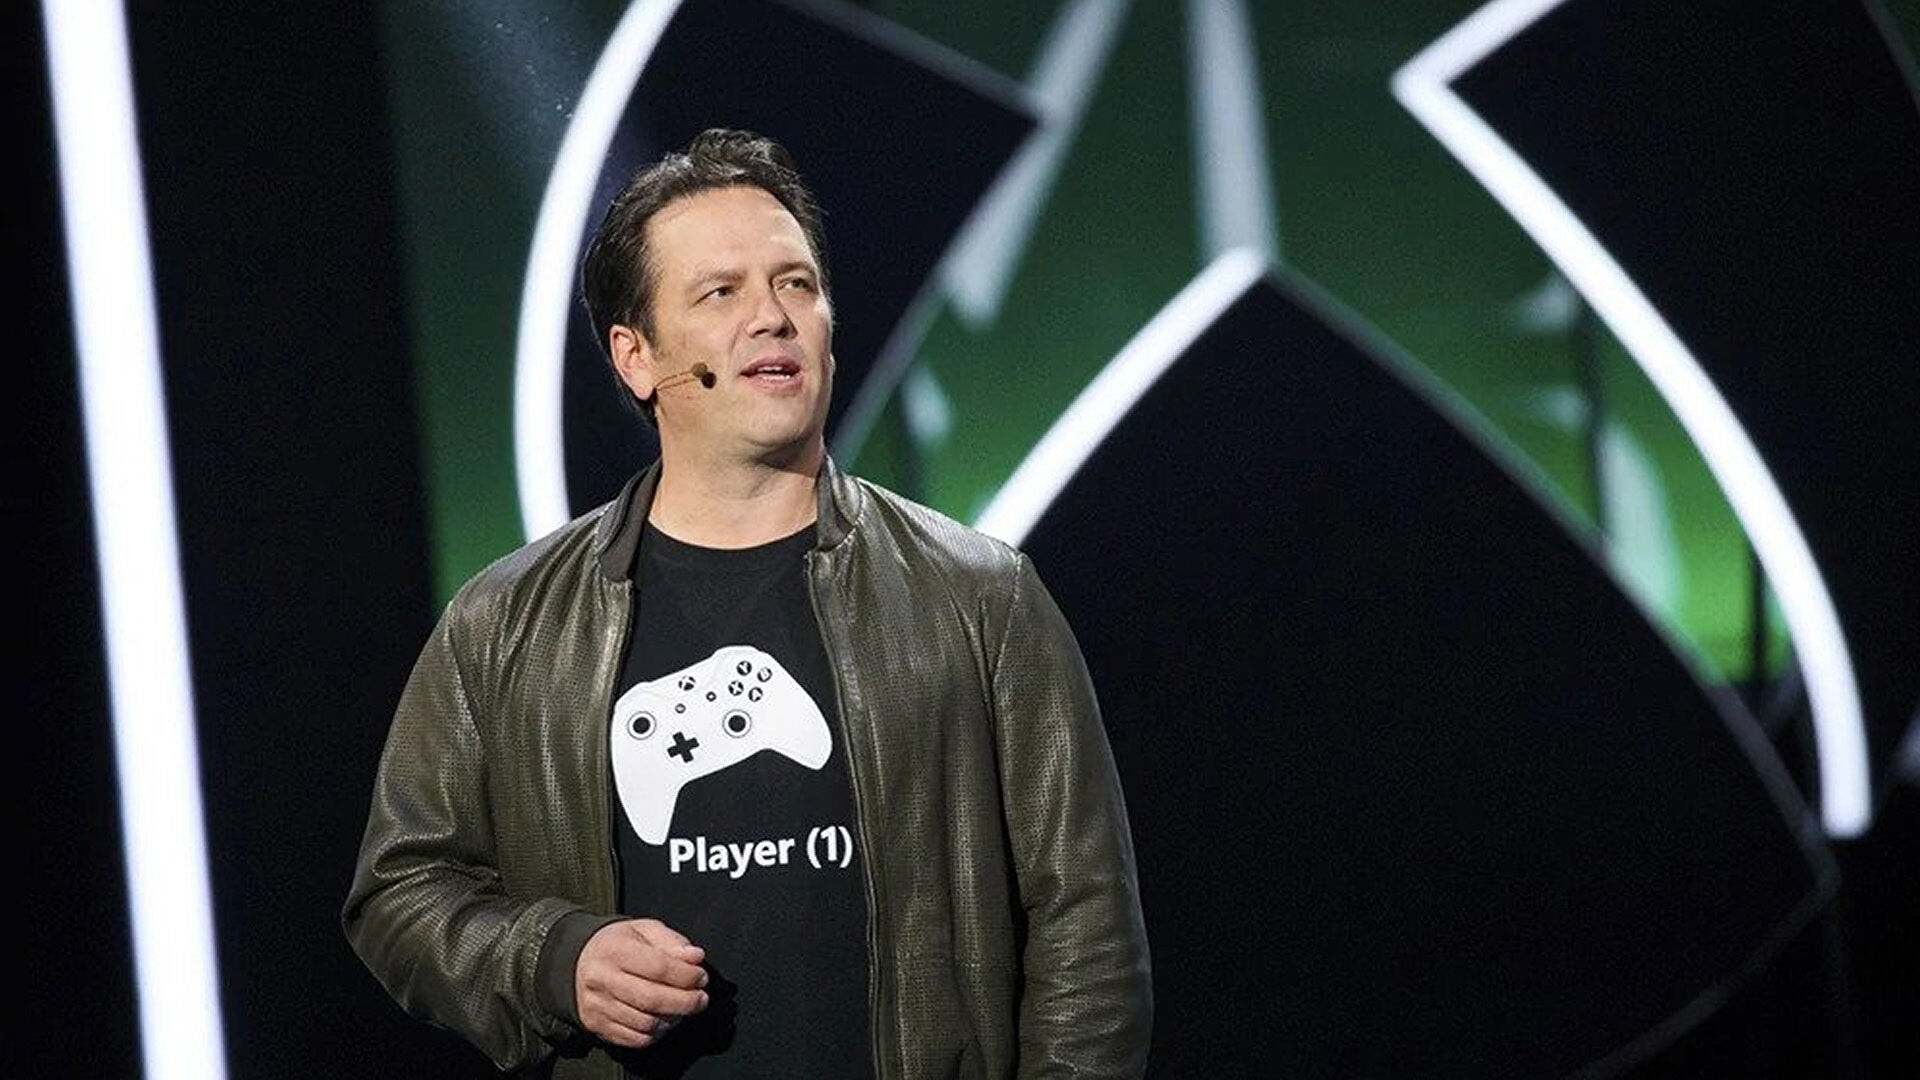 Phil Spencer reiterates there are no plans for a price hike on Xbox Series consoles